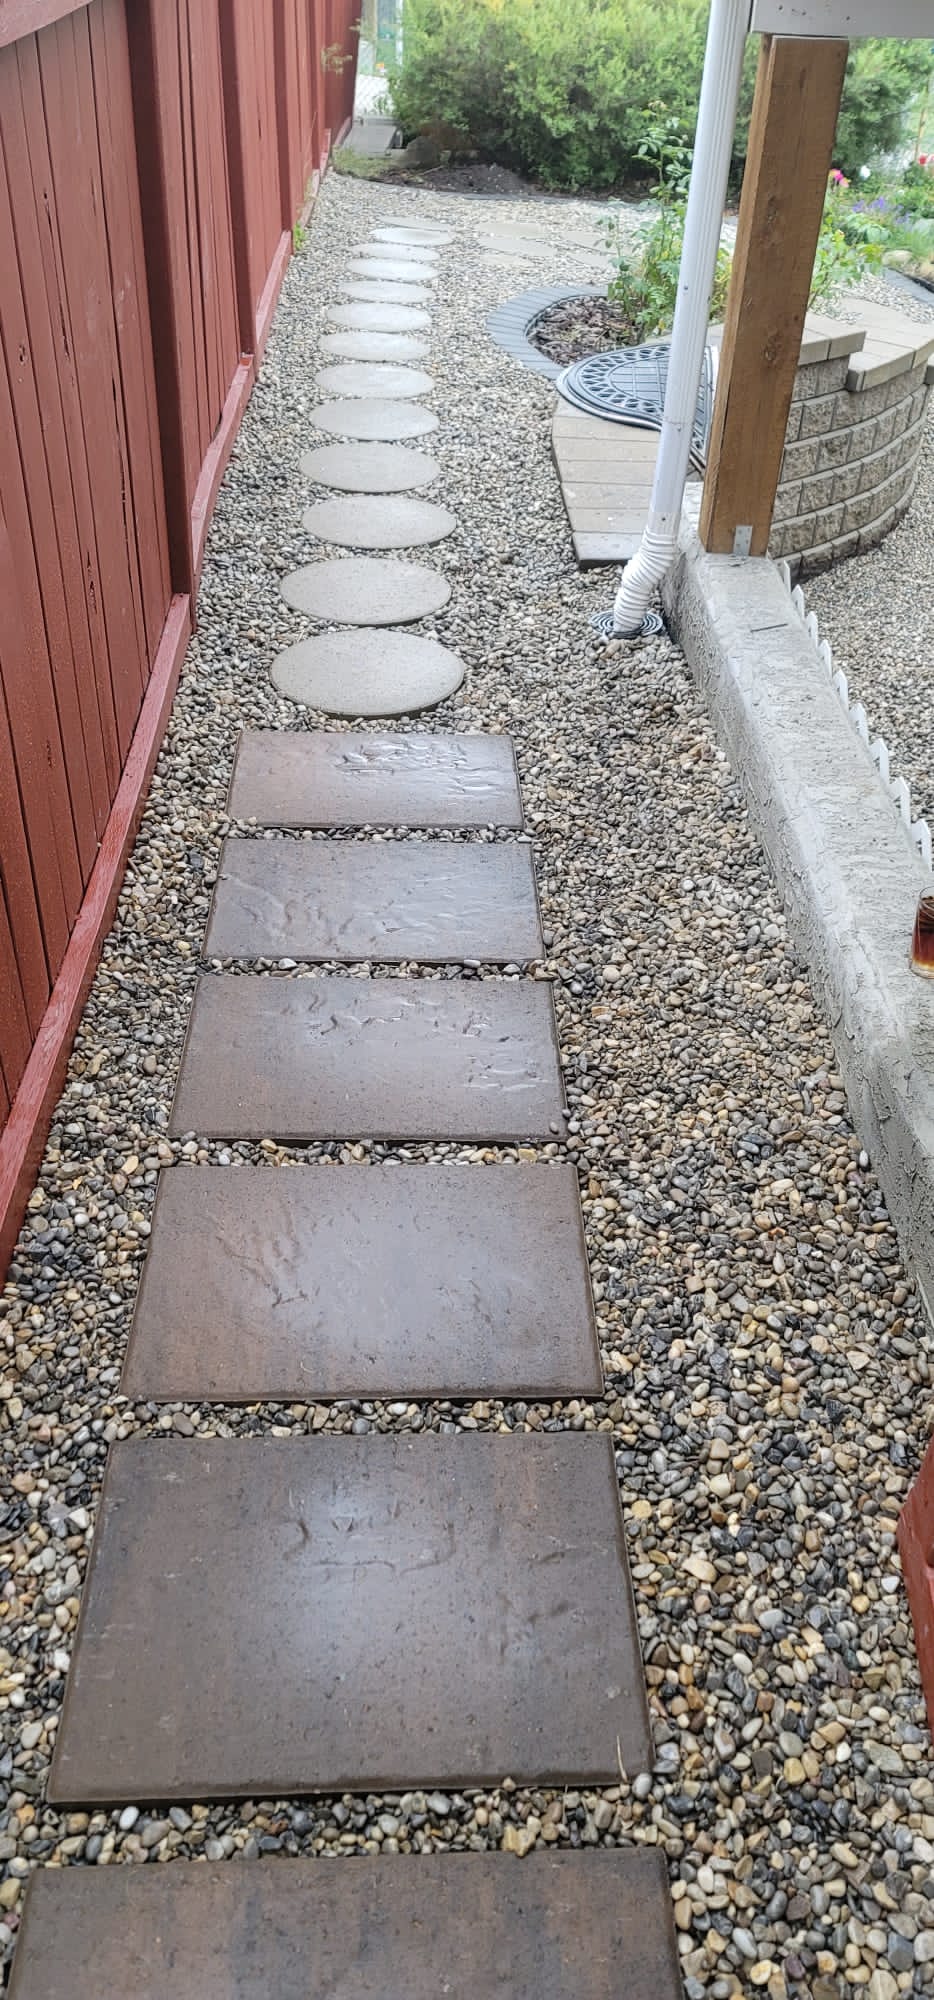 Arbour-Lake-Calgary-Landscaping-side-yard-stepping-stones-french-drain-rocks-